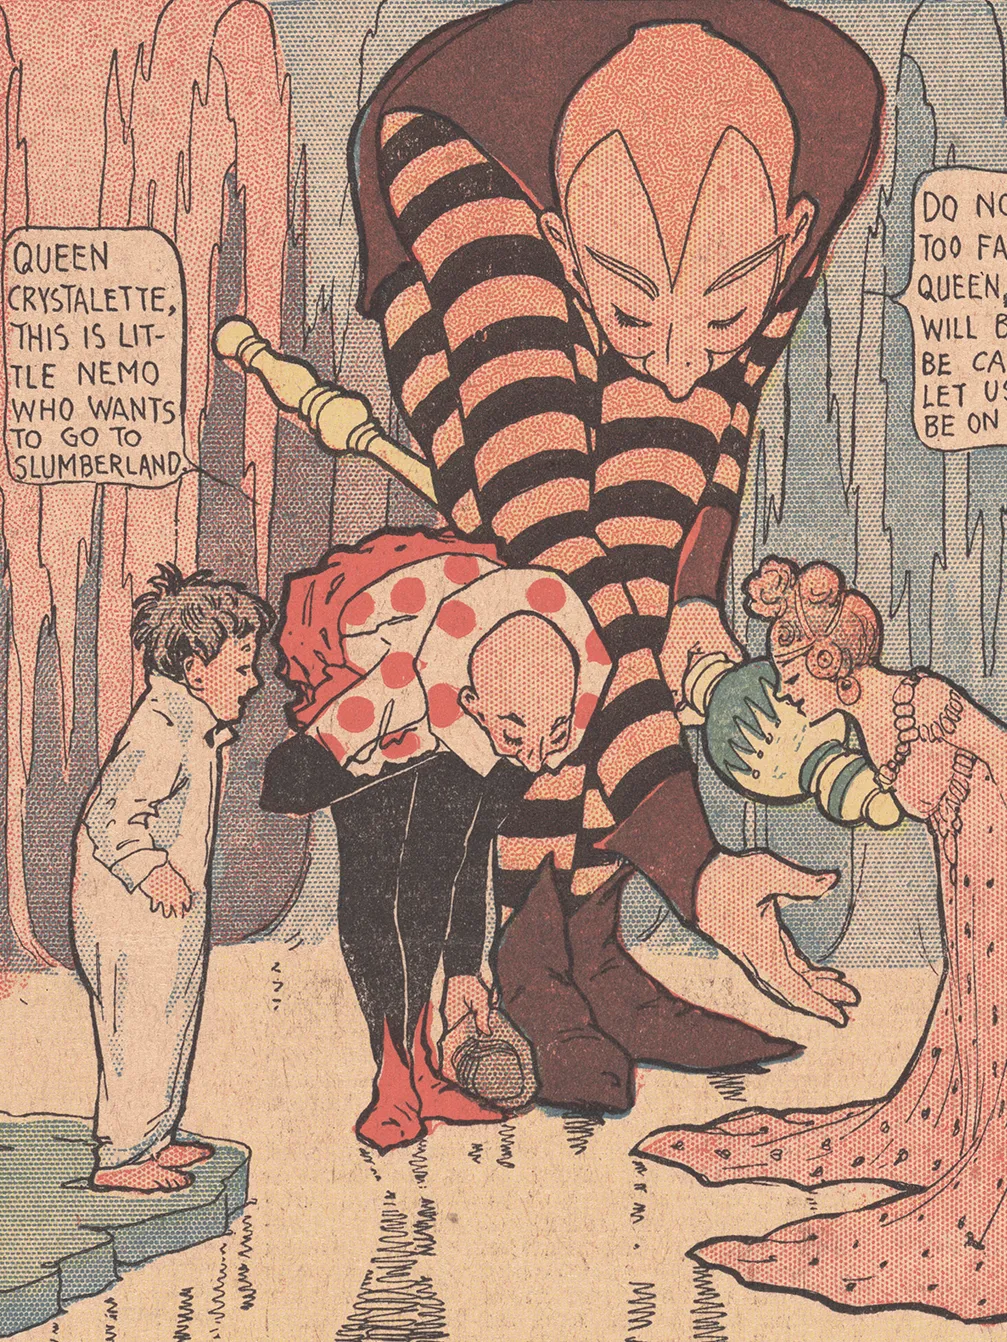 Part of a newspaper page shows a child, a bald man in a jester outfit, a lady wearing a ball gown and a giant man in another jester-like outfit. The adults are bowing. The regular-sized man says, “Queen Crystalette, this is Little Nemo who wants to go to Slumberland.” The giant man says, “Do not bend too far, My Queen, or you will break. Be careful. Let us now be on our way.”